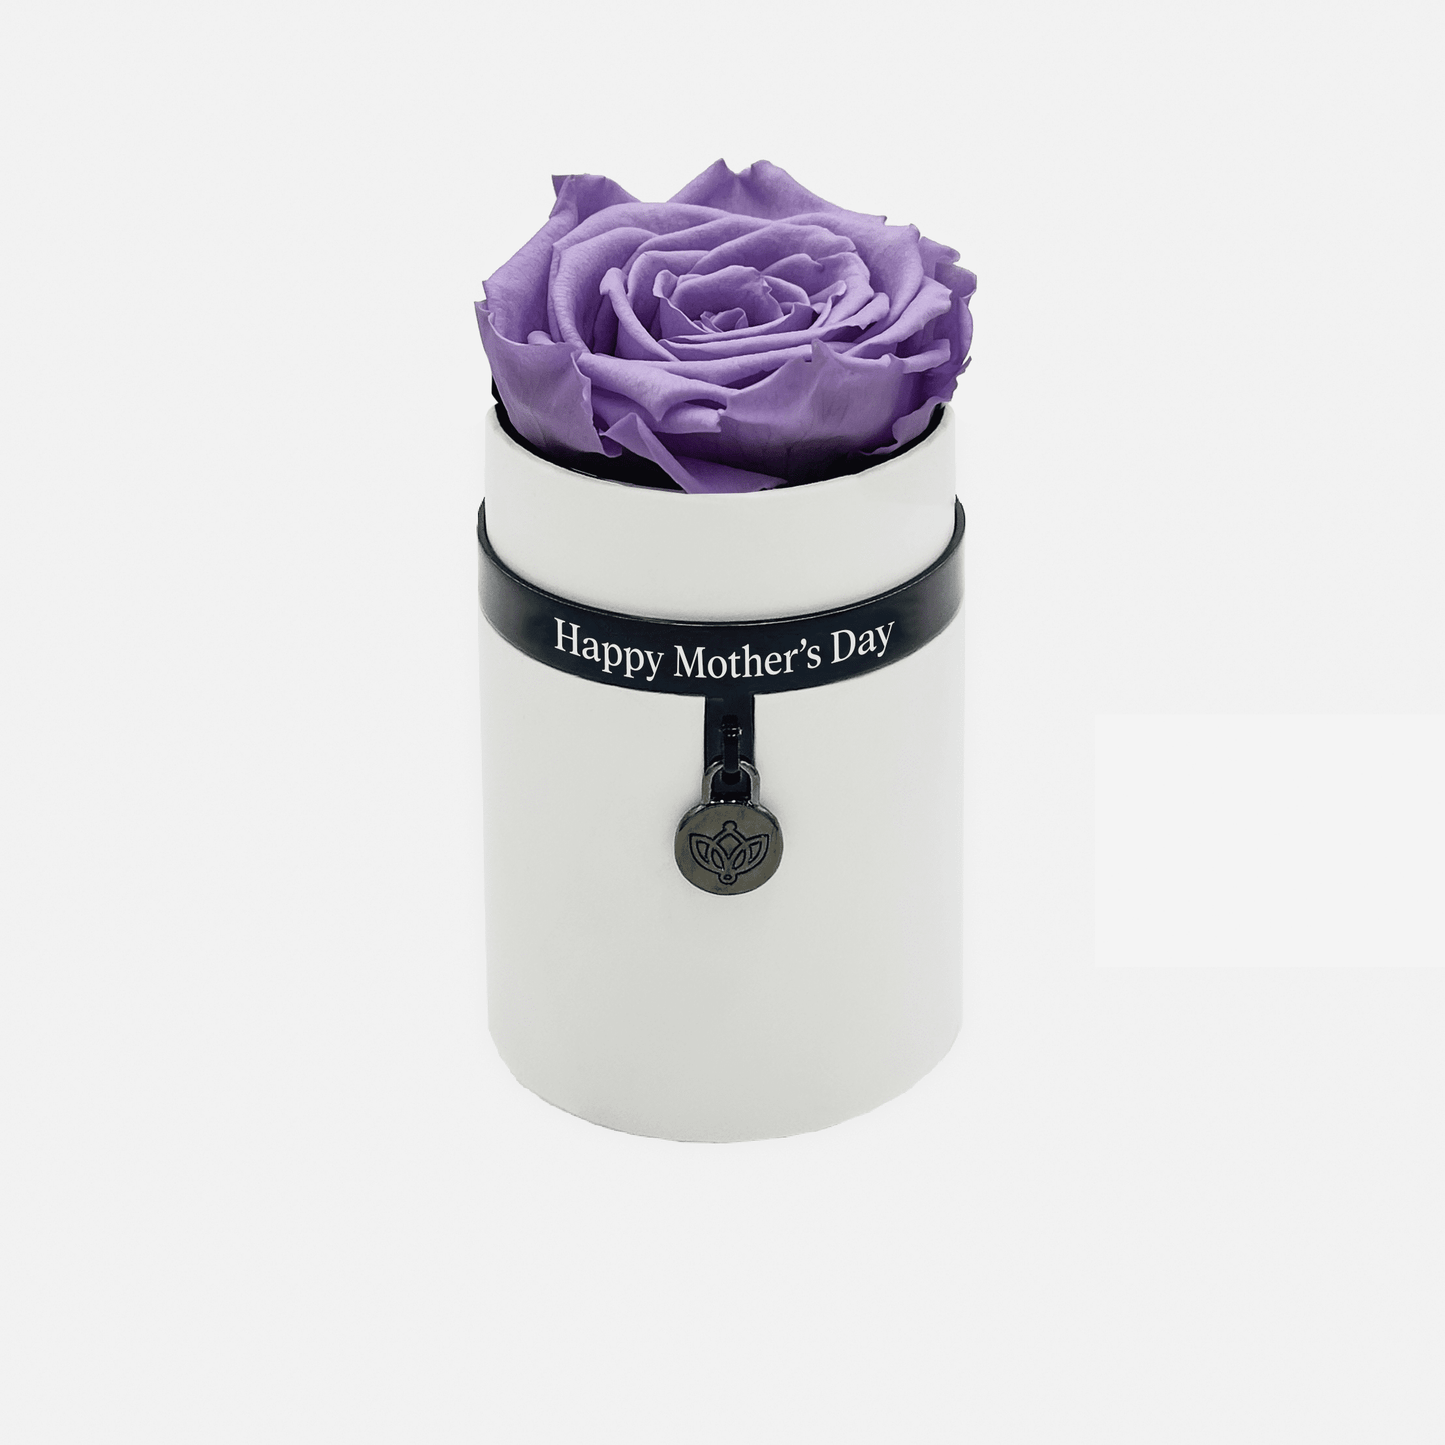 One in a Million™ Round White Box | Happy Mother's Day | Lavender Rose